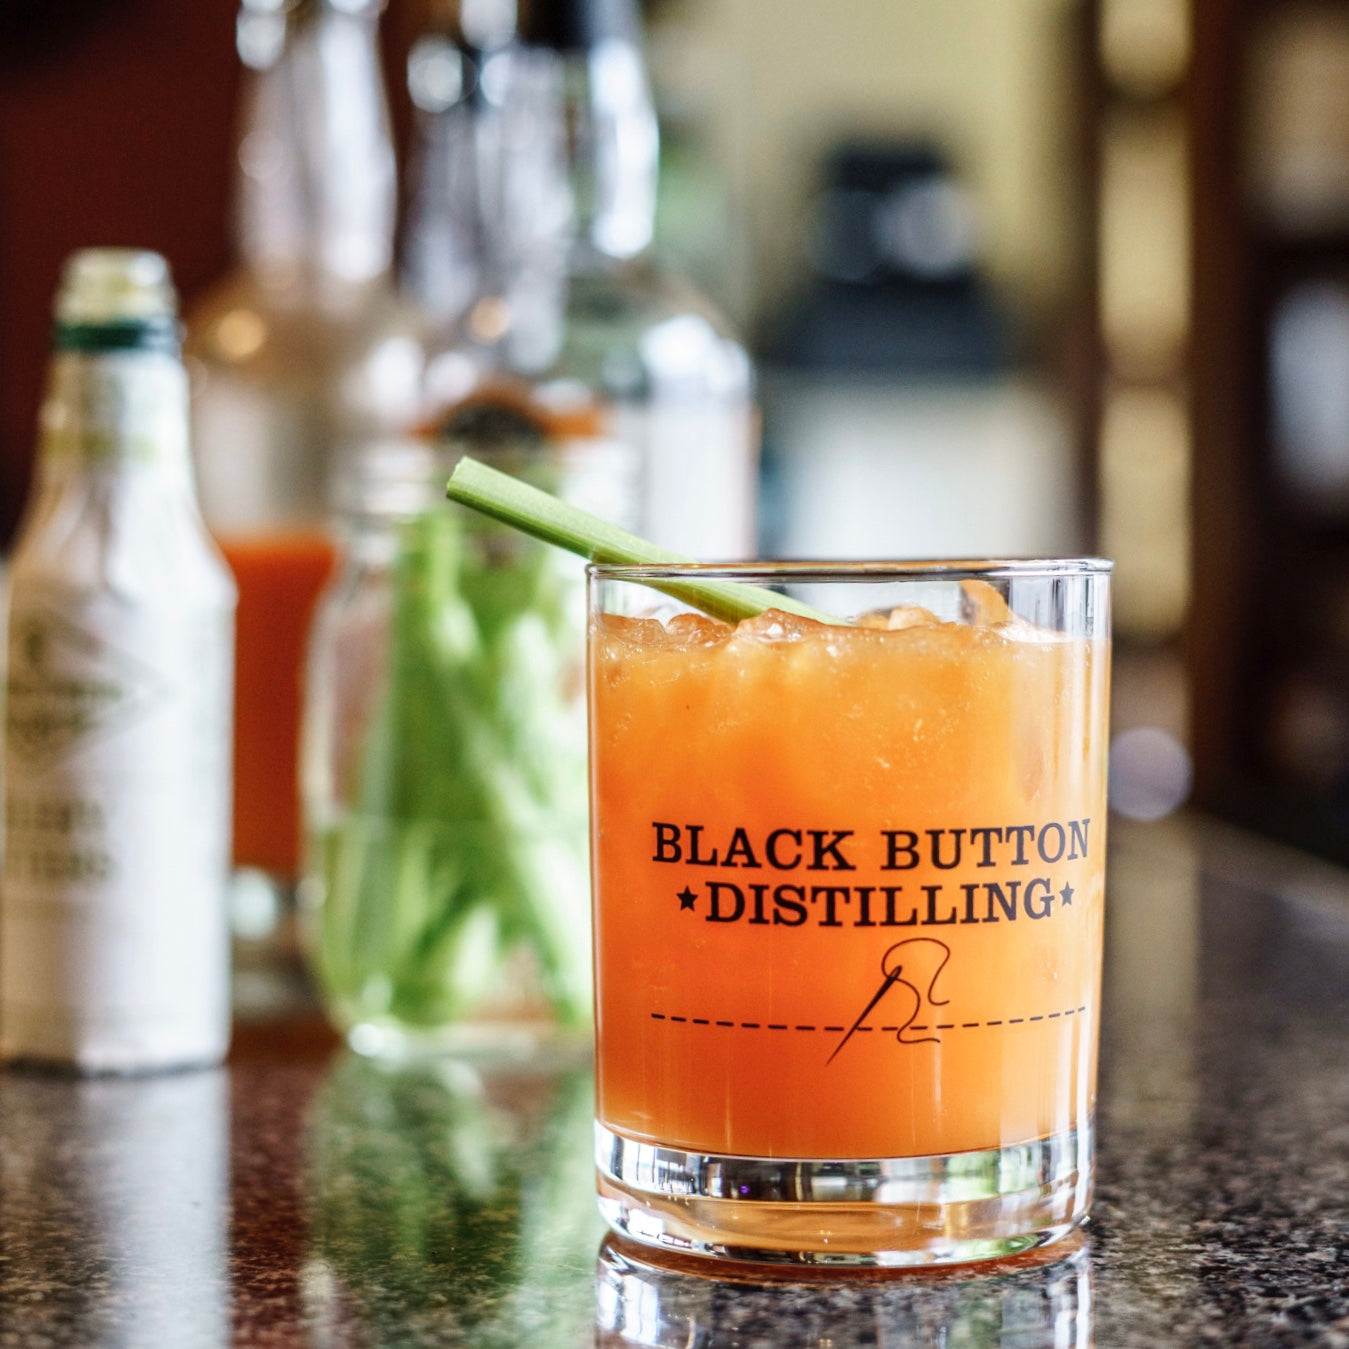 Carrot Top by Black Button Distilling